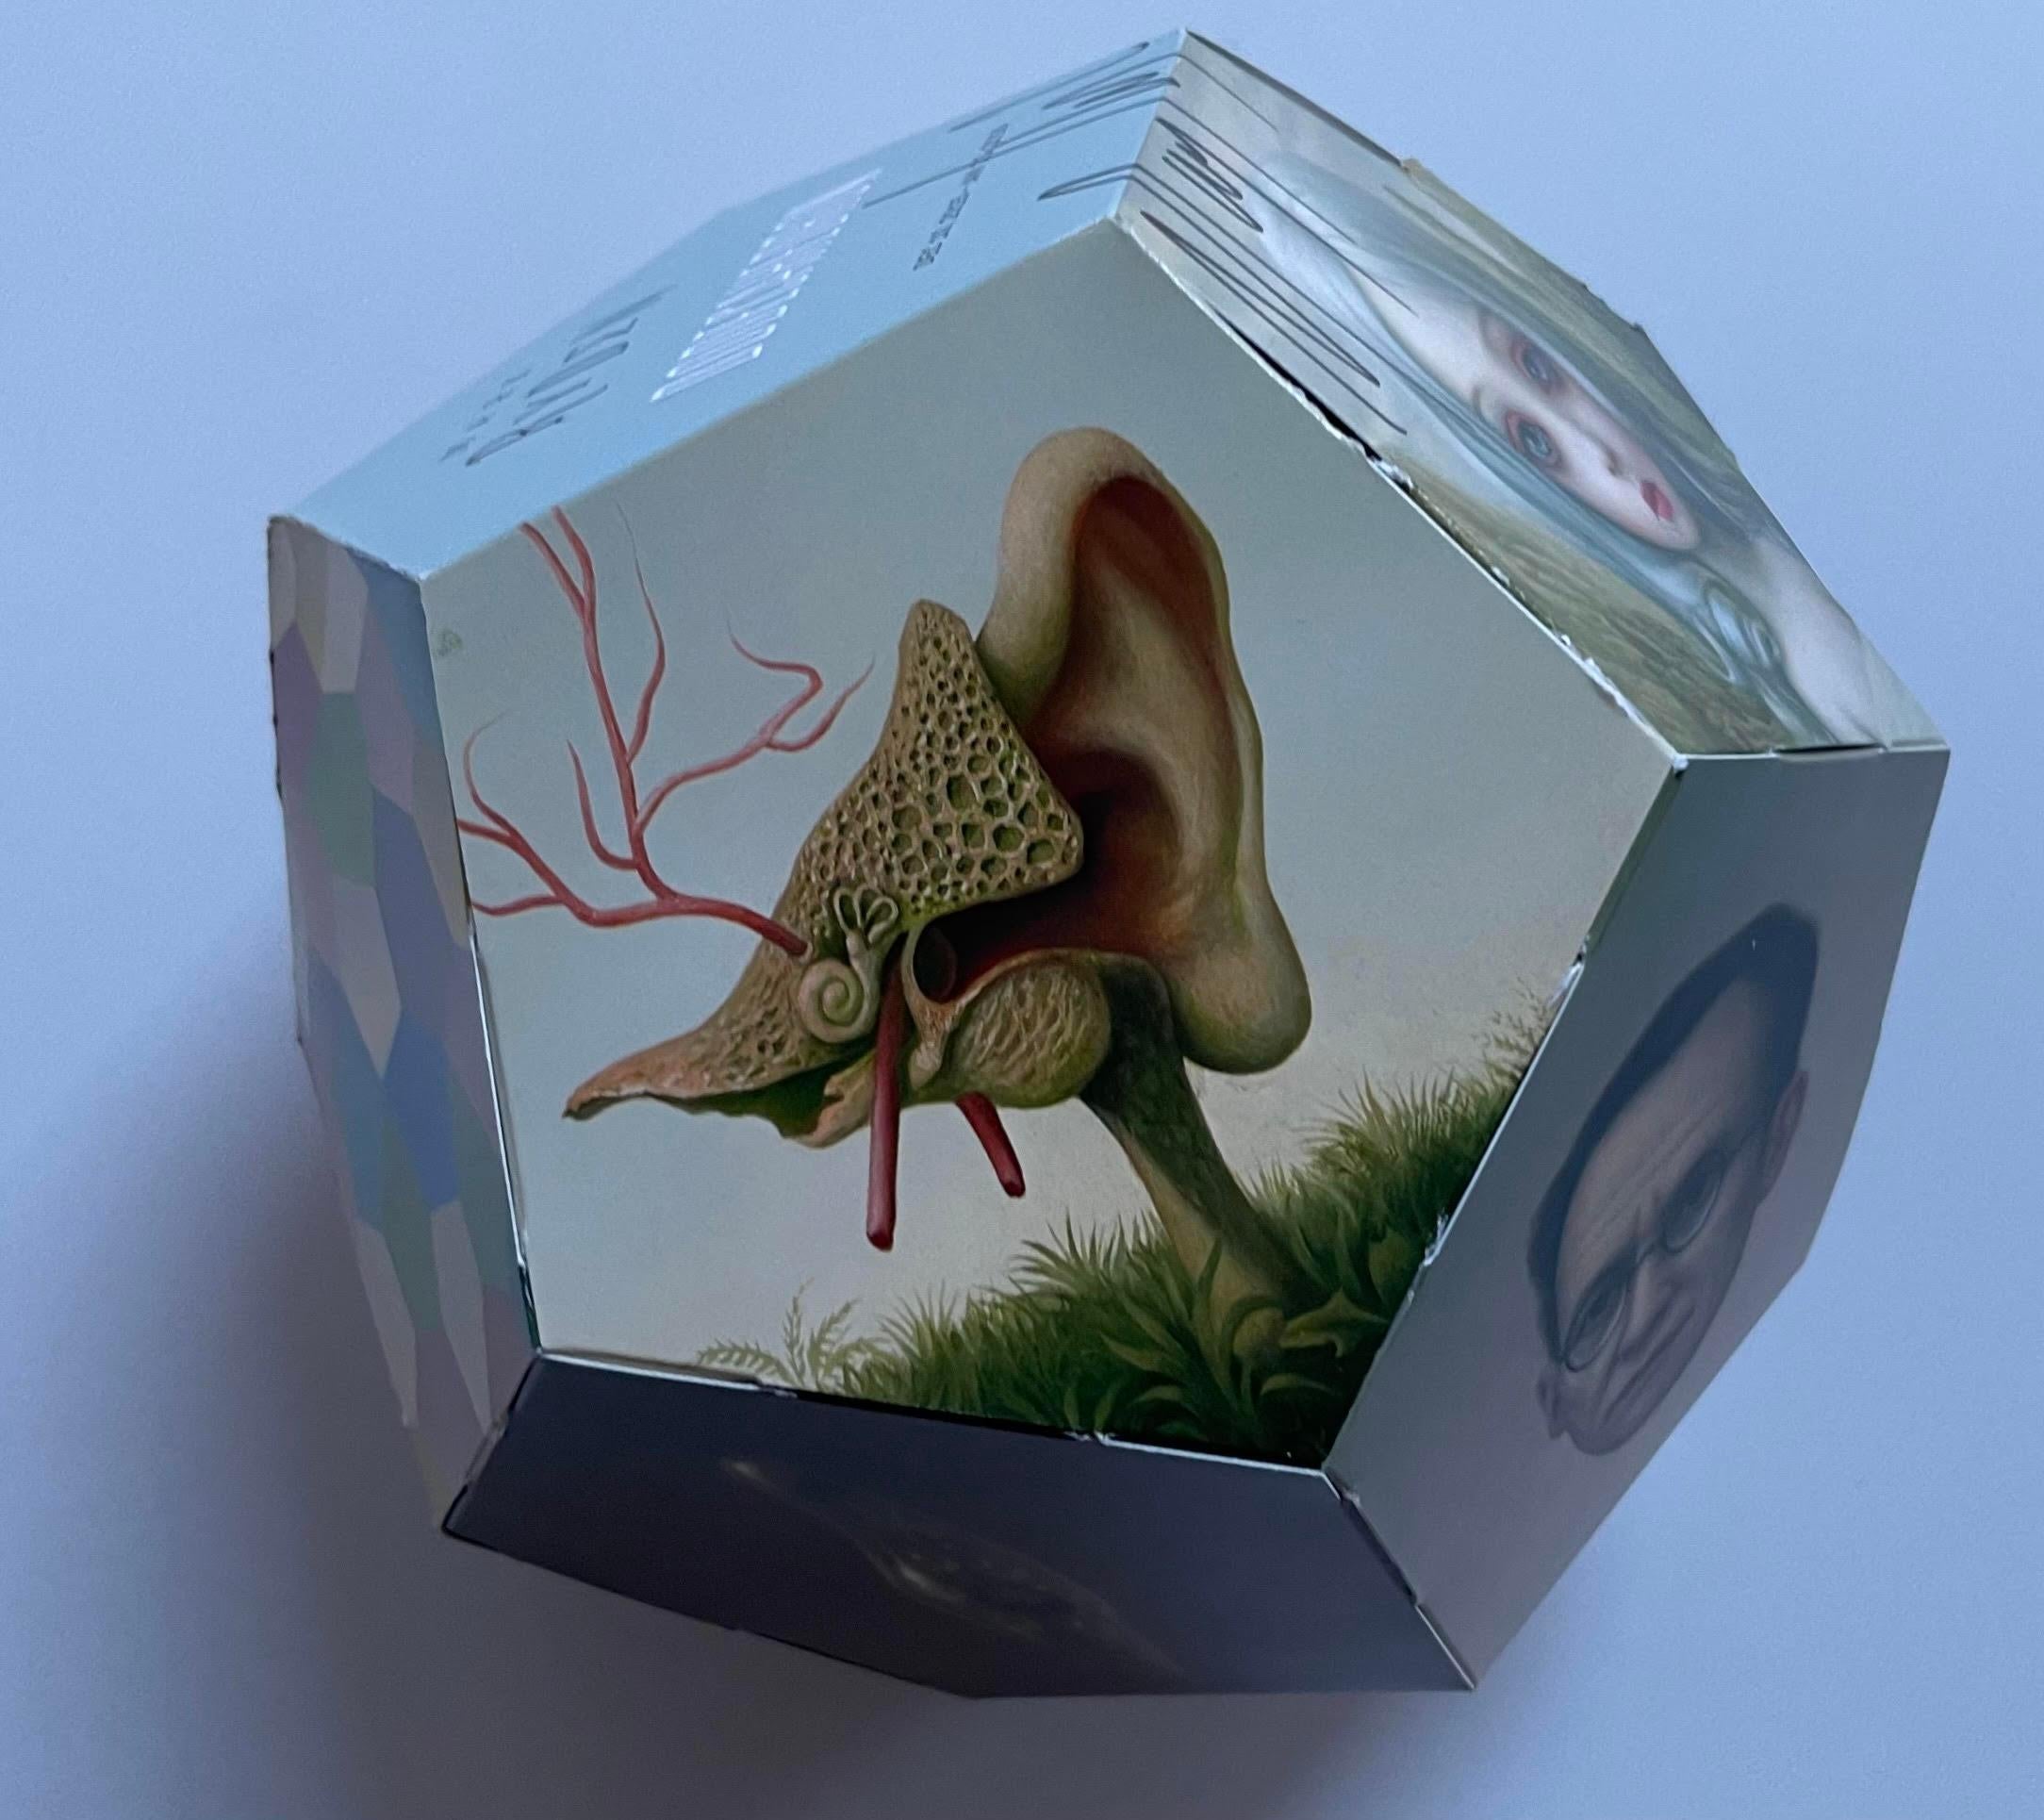 2 part invitation forming a 3-D Dodecahedron Hand signed by Mark Ryden at Kasmin For Sale 7